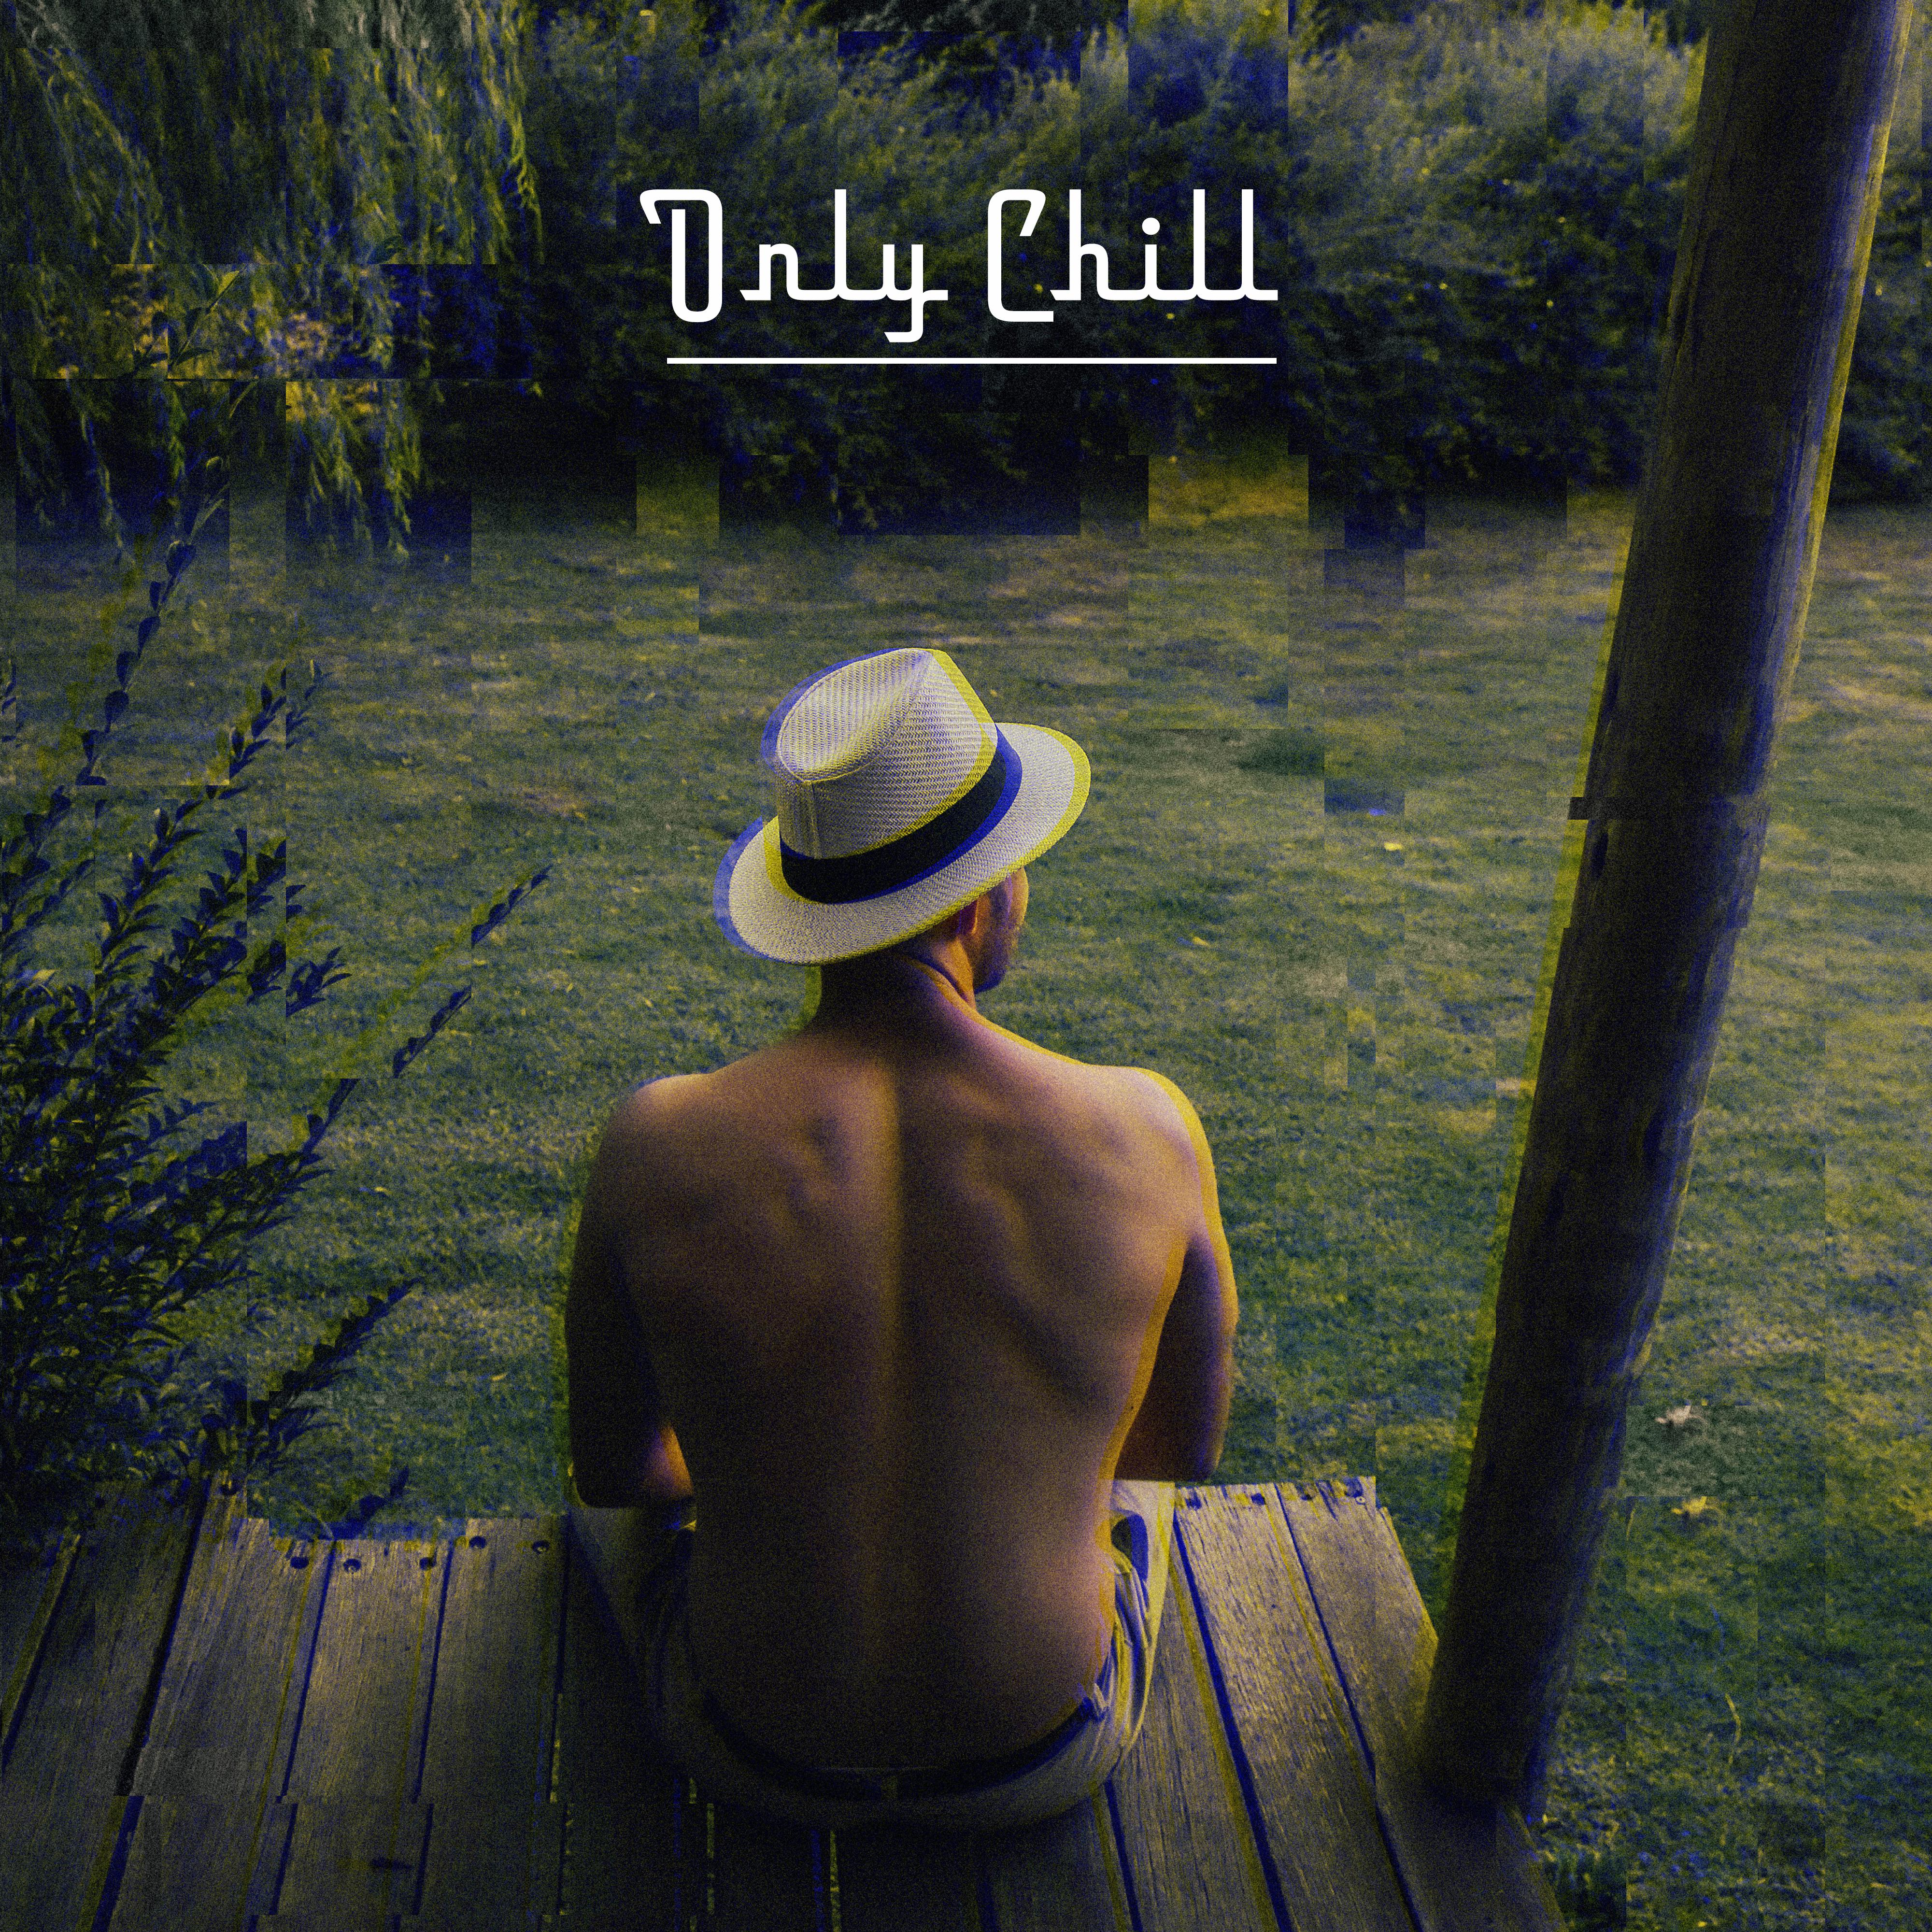 Only Chill: Ibiza Lounge, Summer Chill Out, Beach Melodies, Relax, Pure Mind, Ibiza Relaxation, Chilled Ibiza